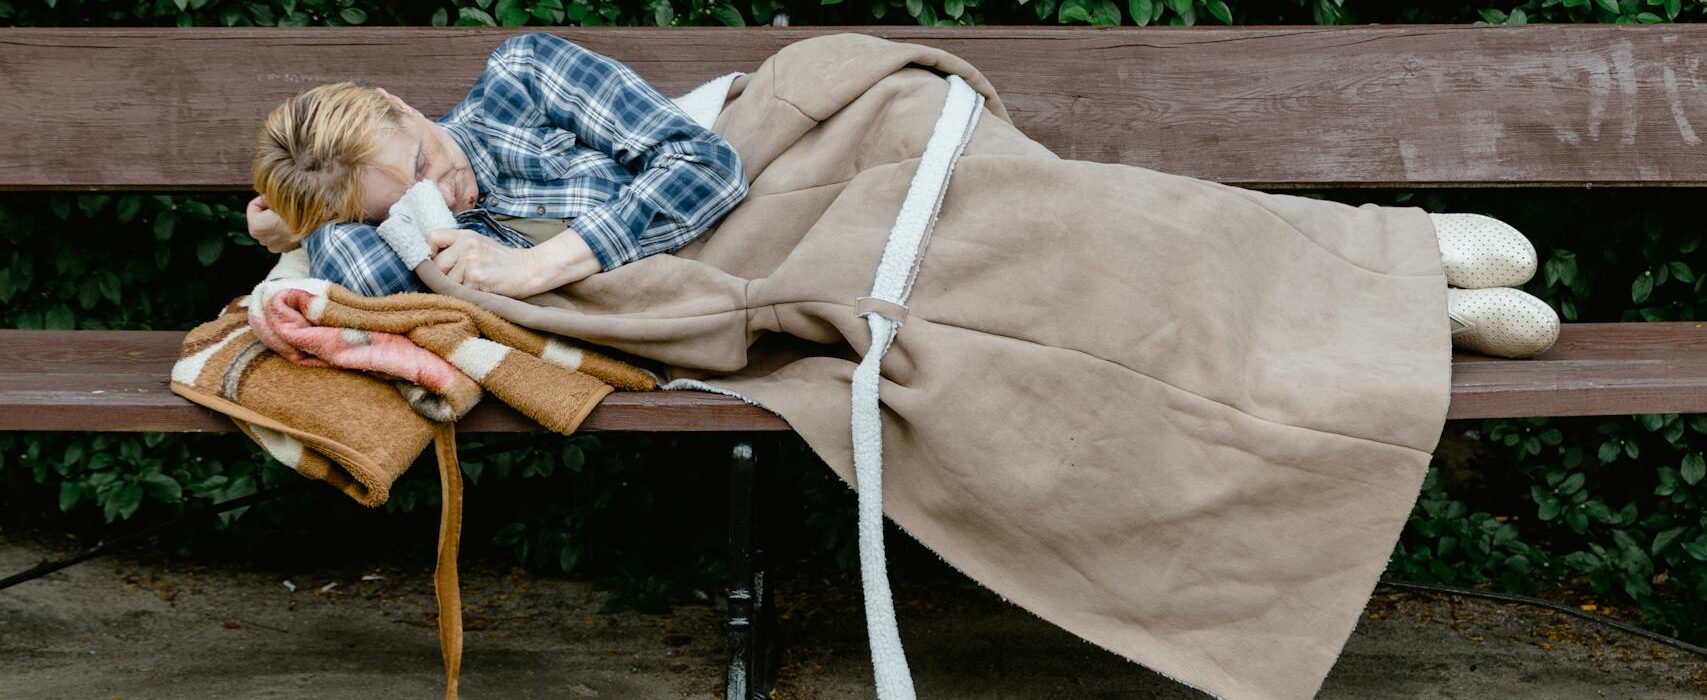 A Woman Sleeping on the Bench